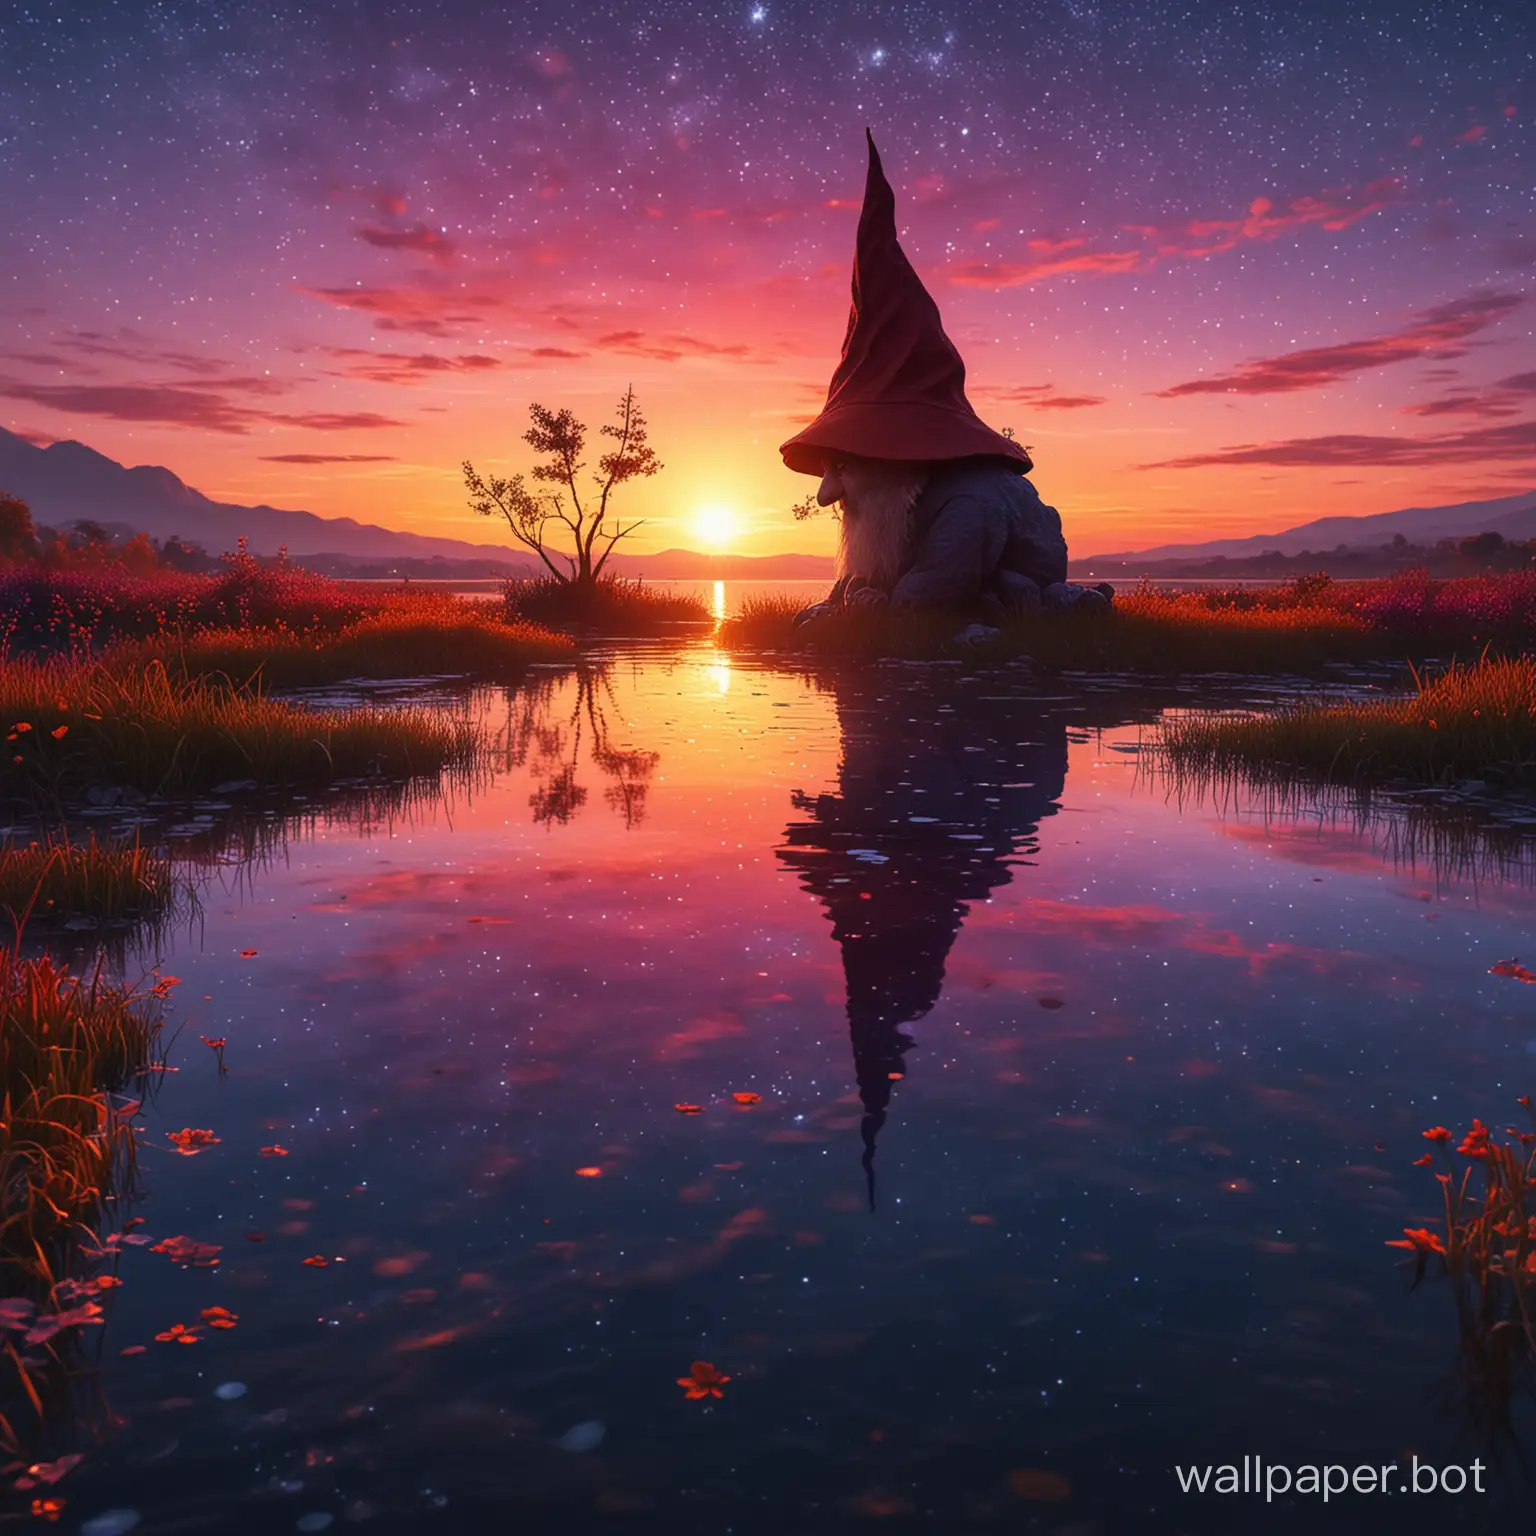 make me an 1920x1080p wallpaper, gnome style landscape, contrasting colours red orange blue purple, sun setting in the middle, beautiful water body, make the sky dark, stars in the sky